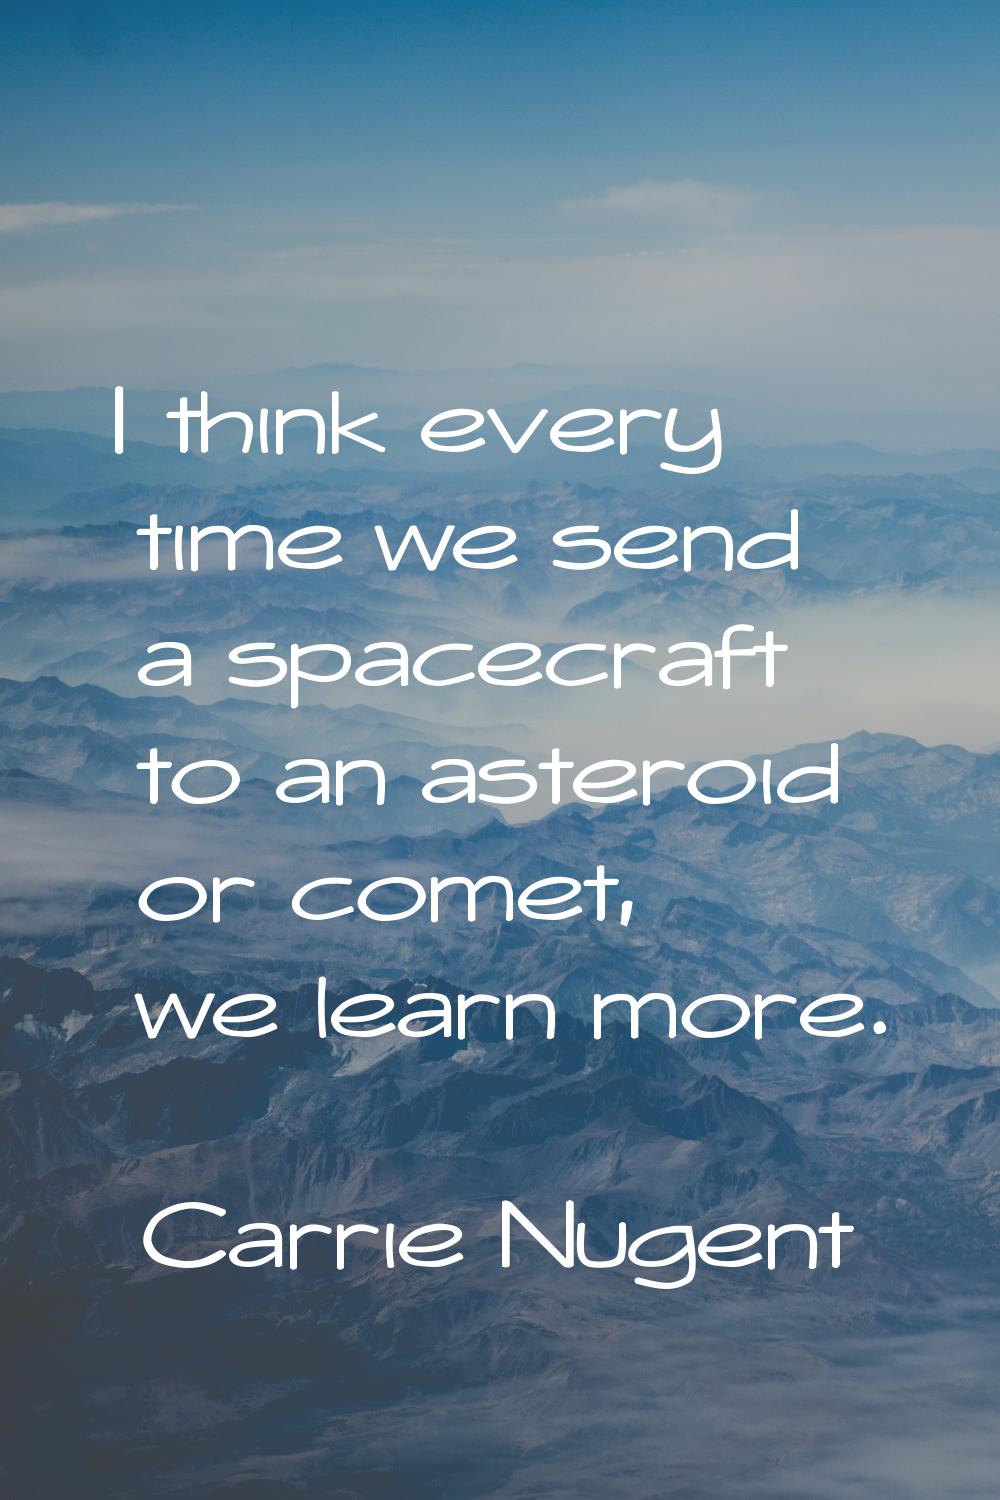 I think every time we send a spacecraft to an asteroid or comet, we learn more.